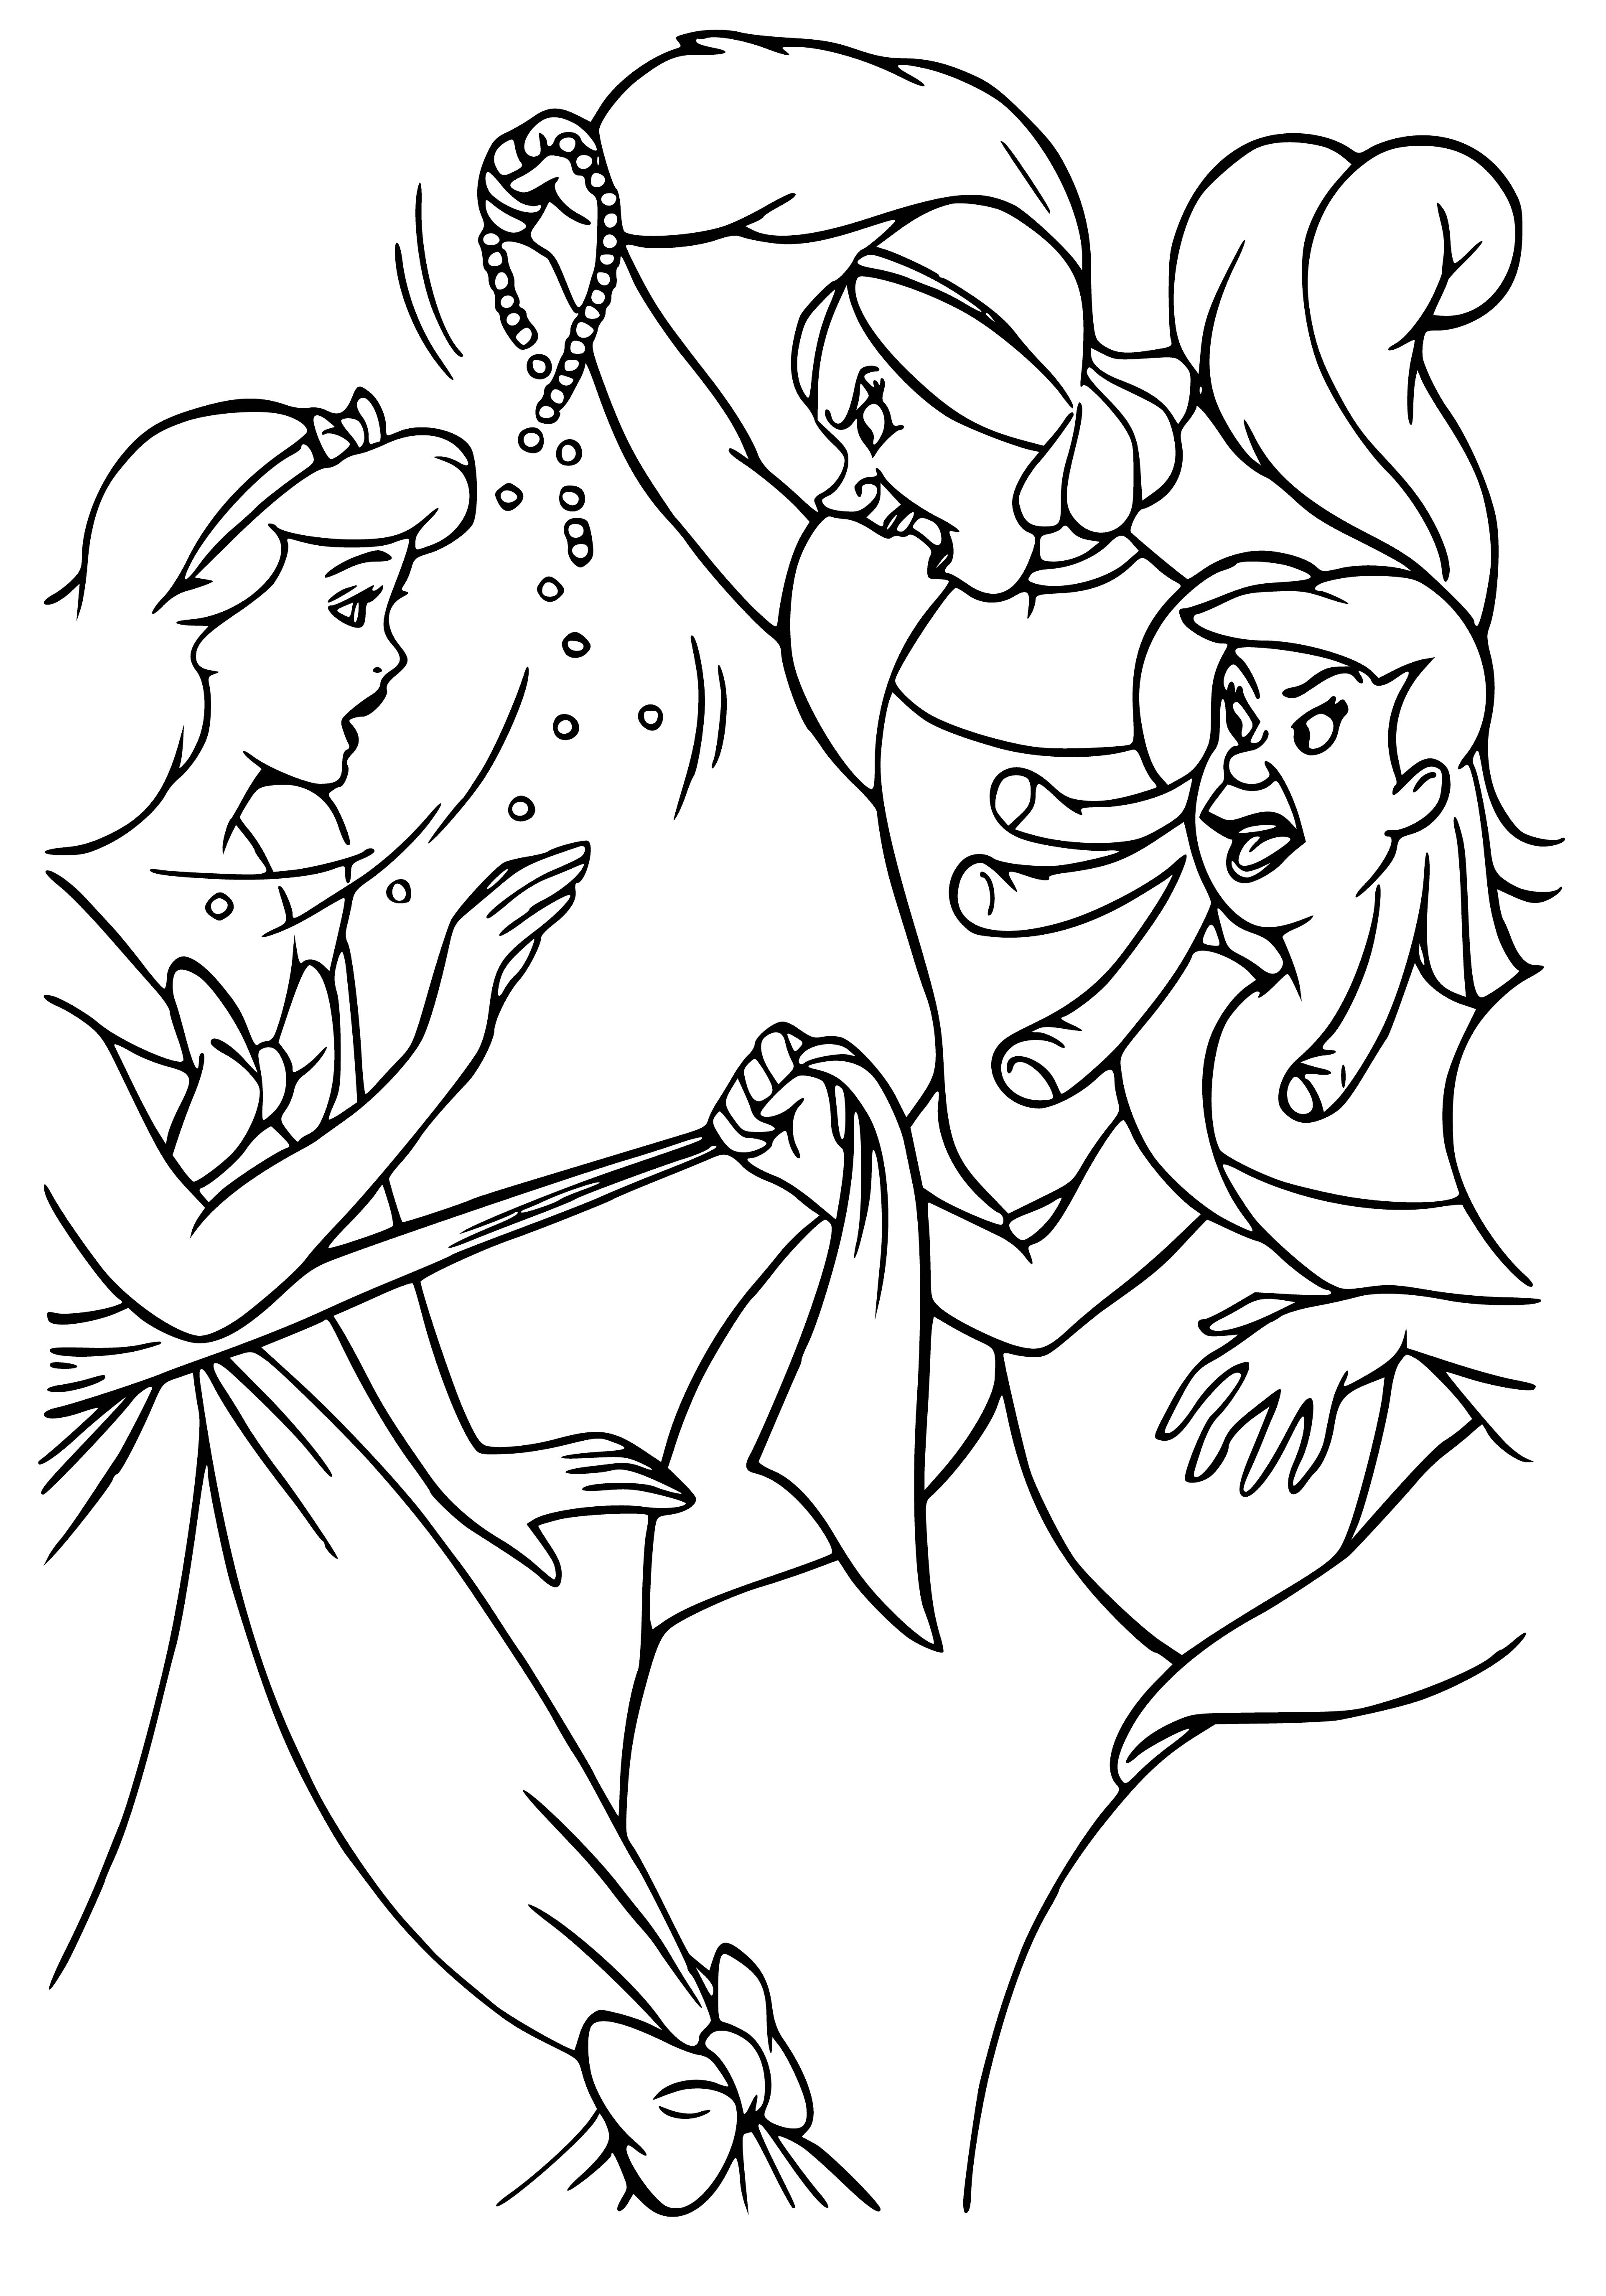 coloring page: Two women with angry expressions, looking at something off to the side & holding a fabric; one with hands on hips. #coloring